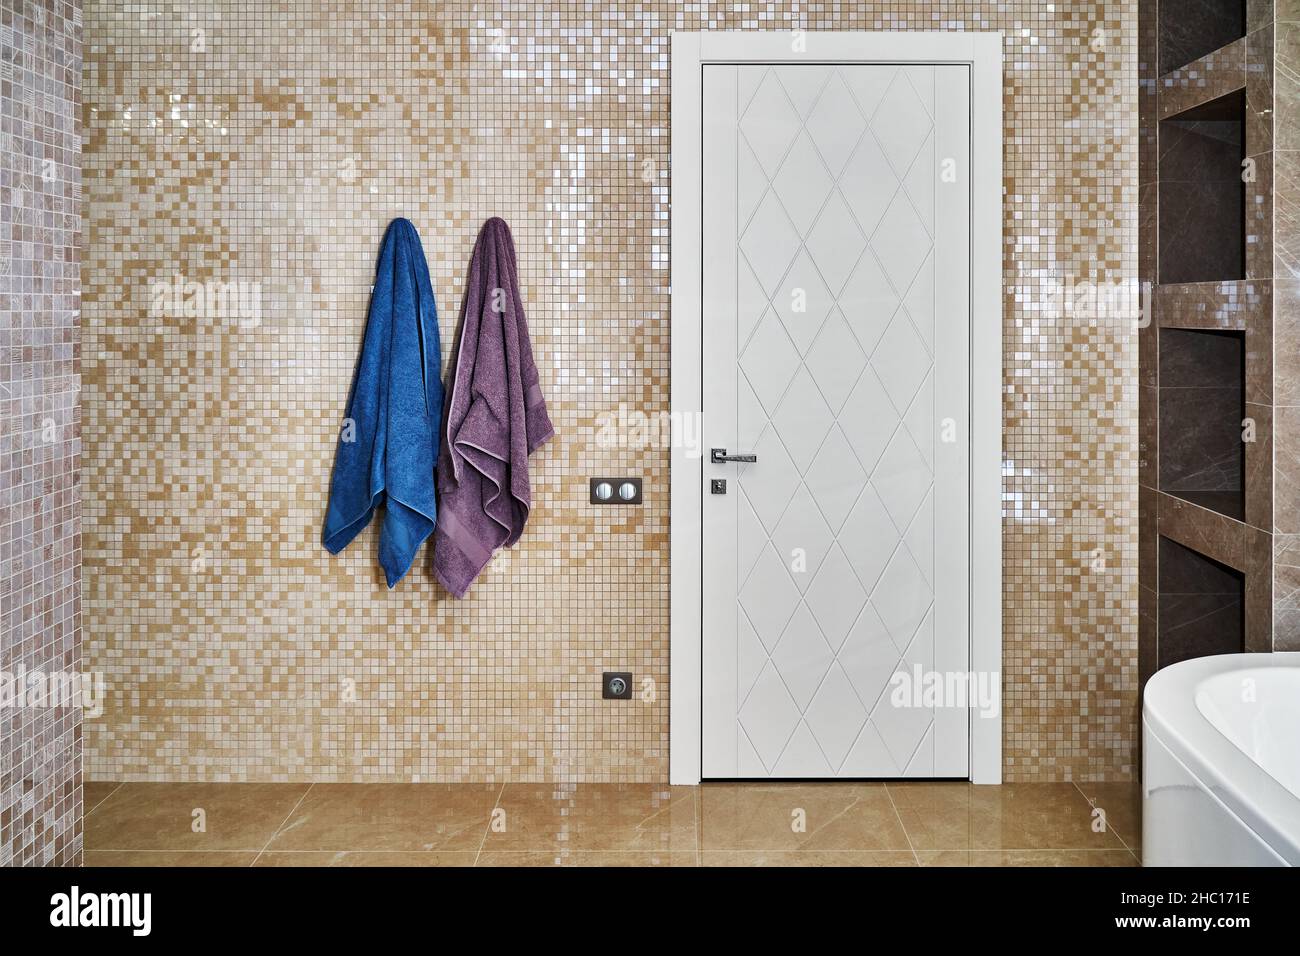 Stylish closed white door with rhombus pattern and hanging terry towels pair in light spacious bathroom decorated with beige patterned ceramic tiles Stock Photo